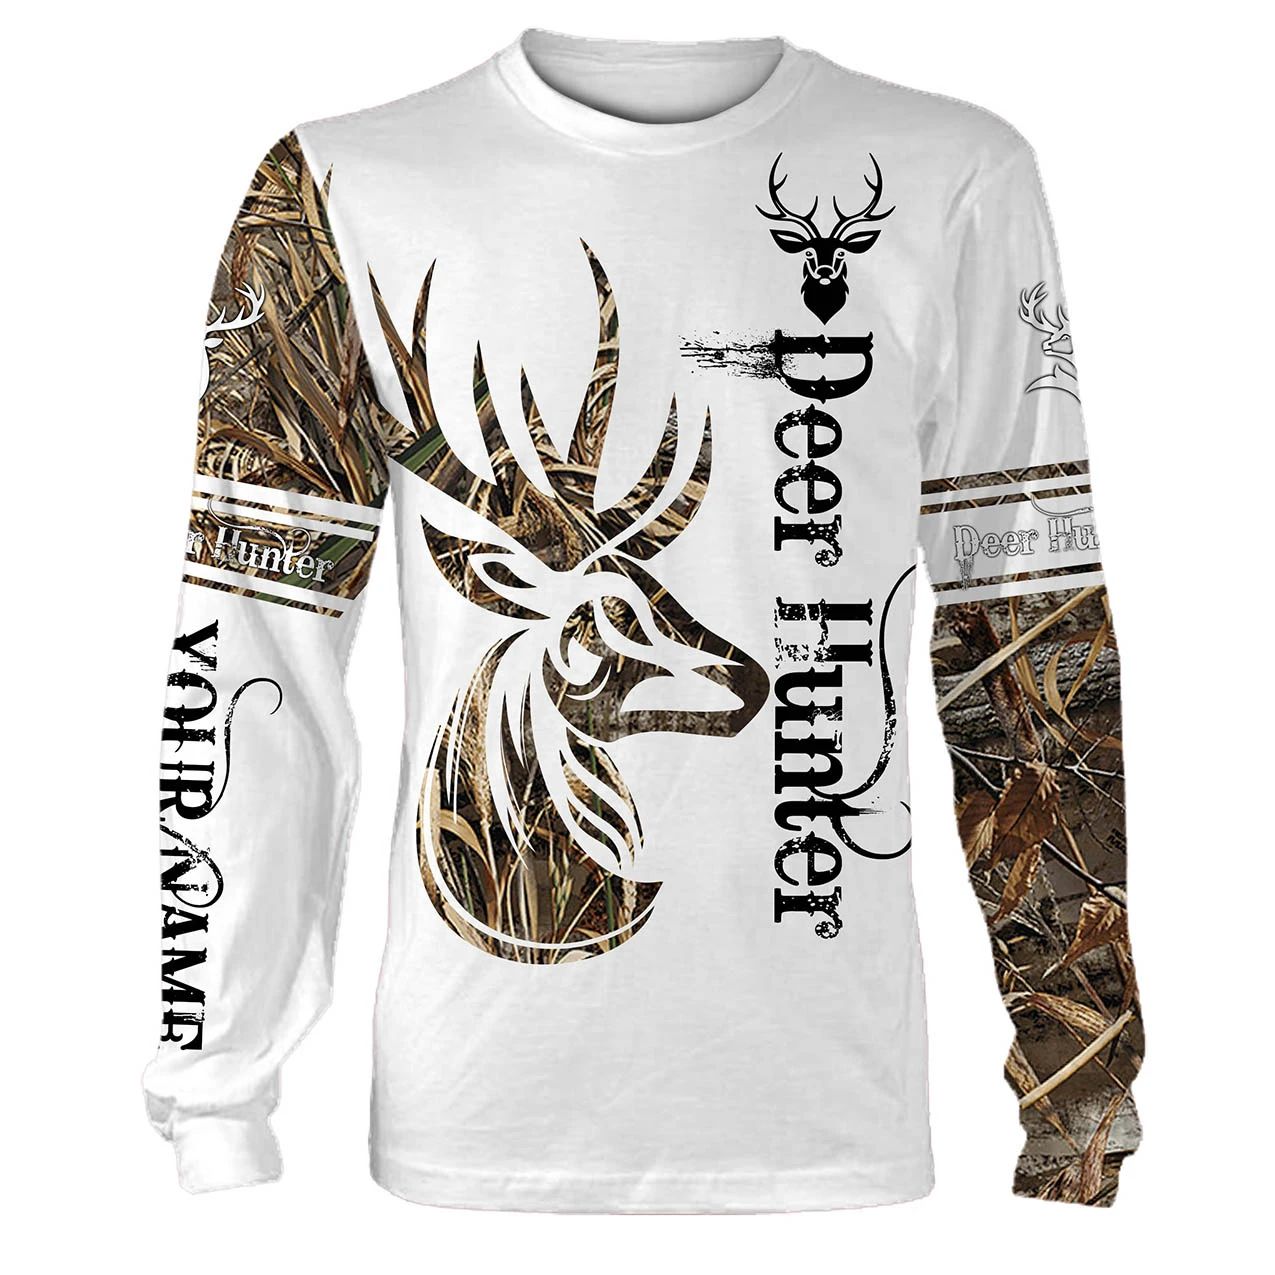 Deer hunter customize name all over print 3d shirt Style: Long sleeves, Size: S